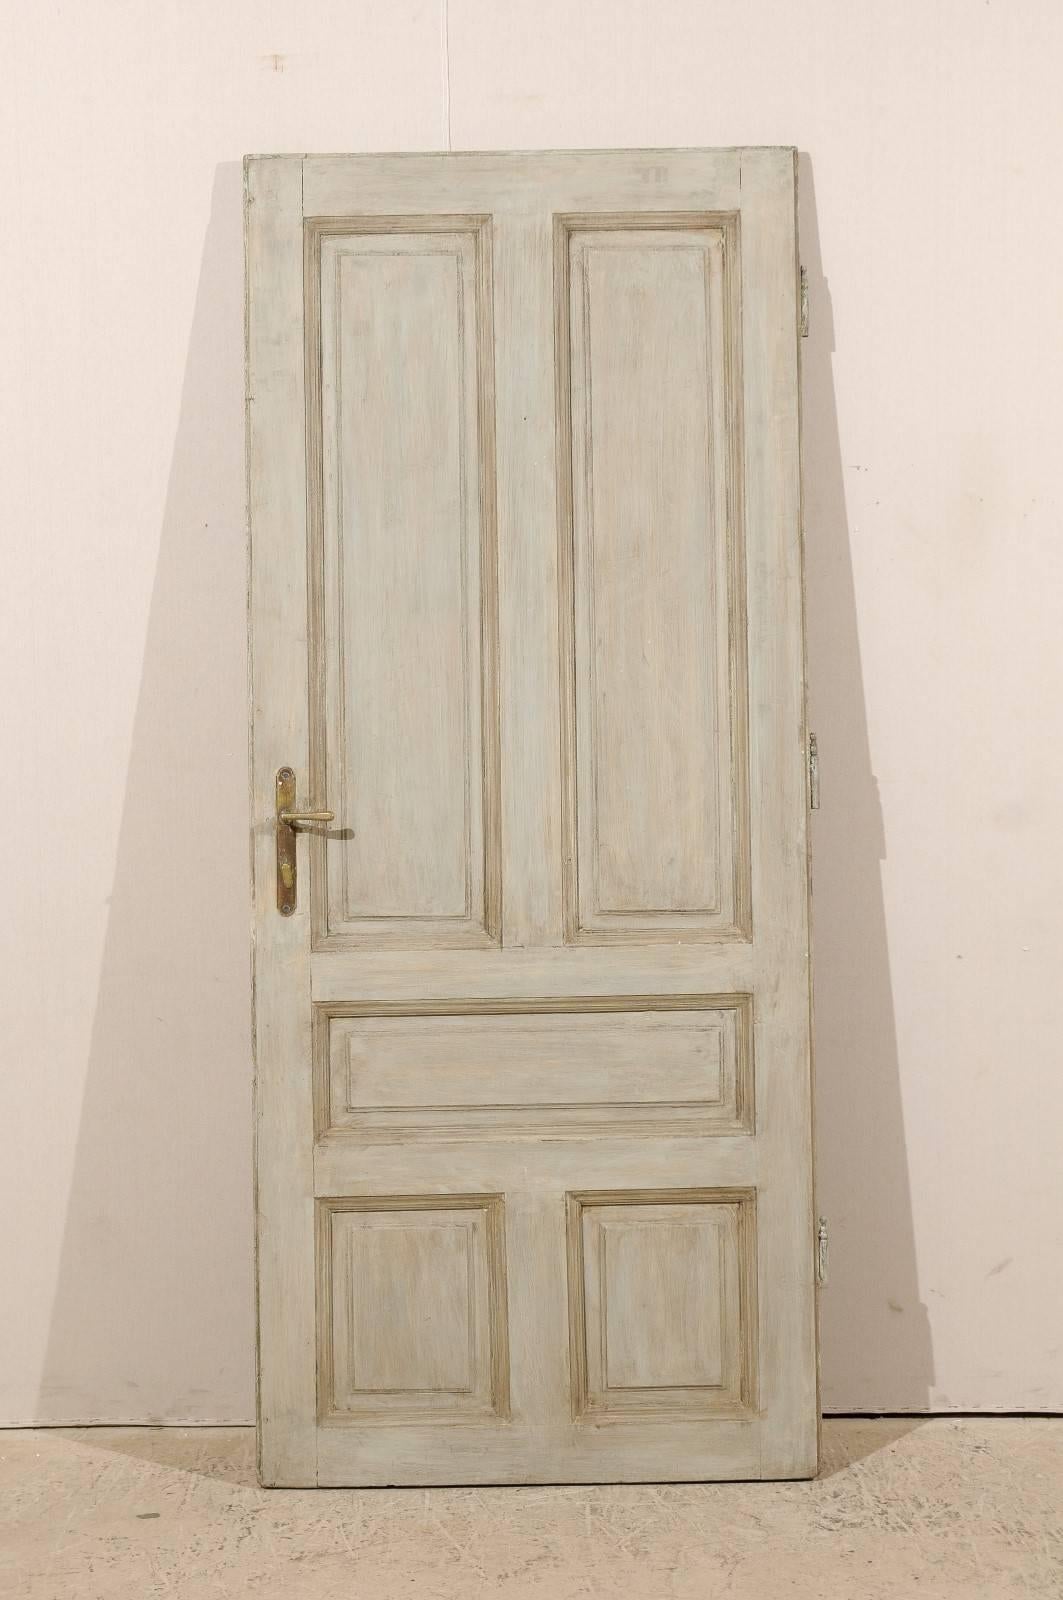 A single European five-panel painted wood door from the early 20th century. The overall color is a grey blue with a darker green brown accent on the molding creating the paneling effect. This door would look perfect as a decorative object or on a